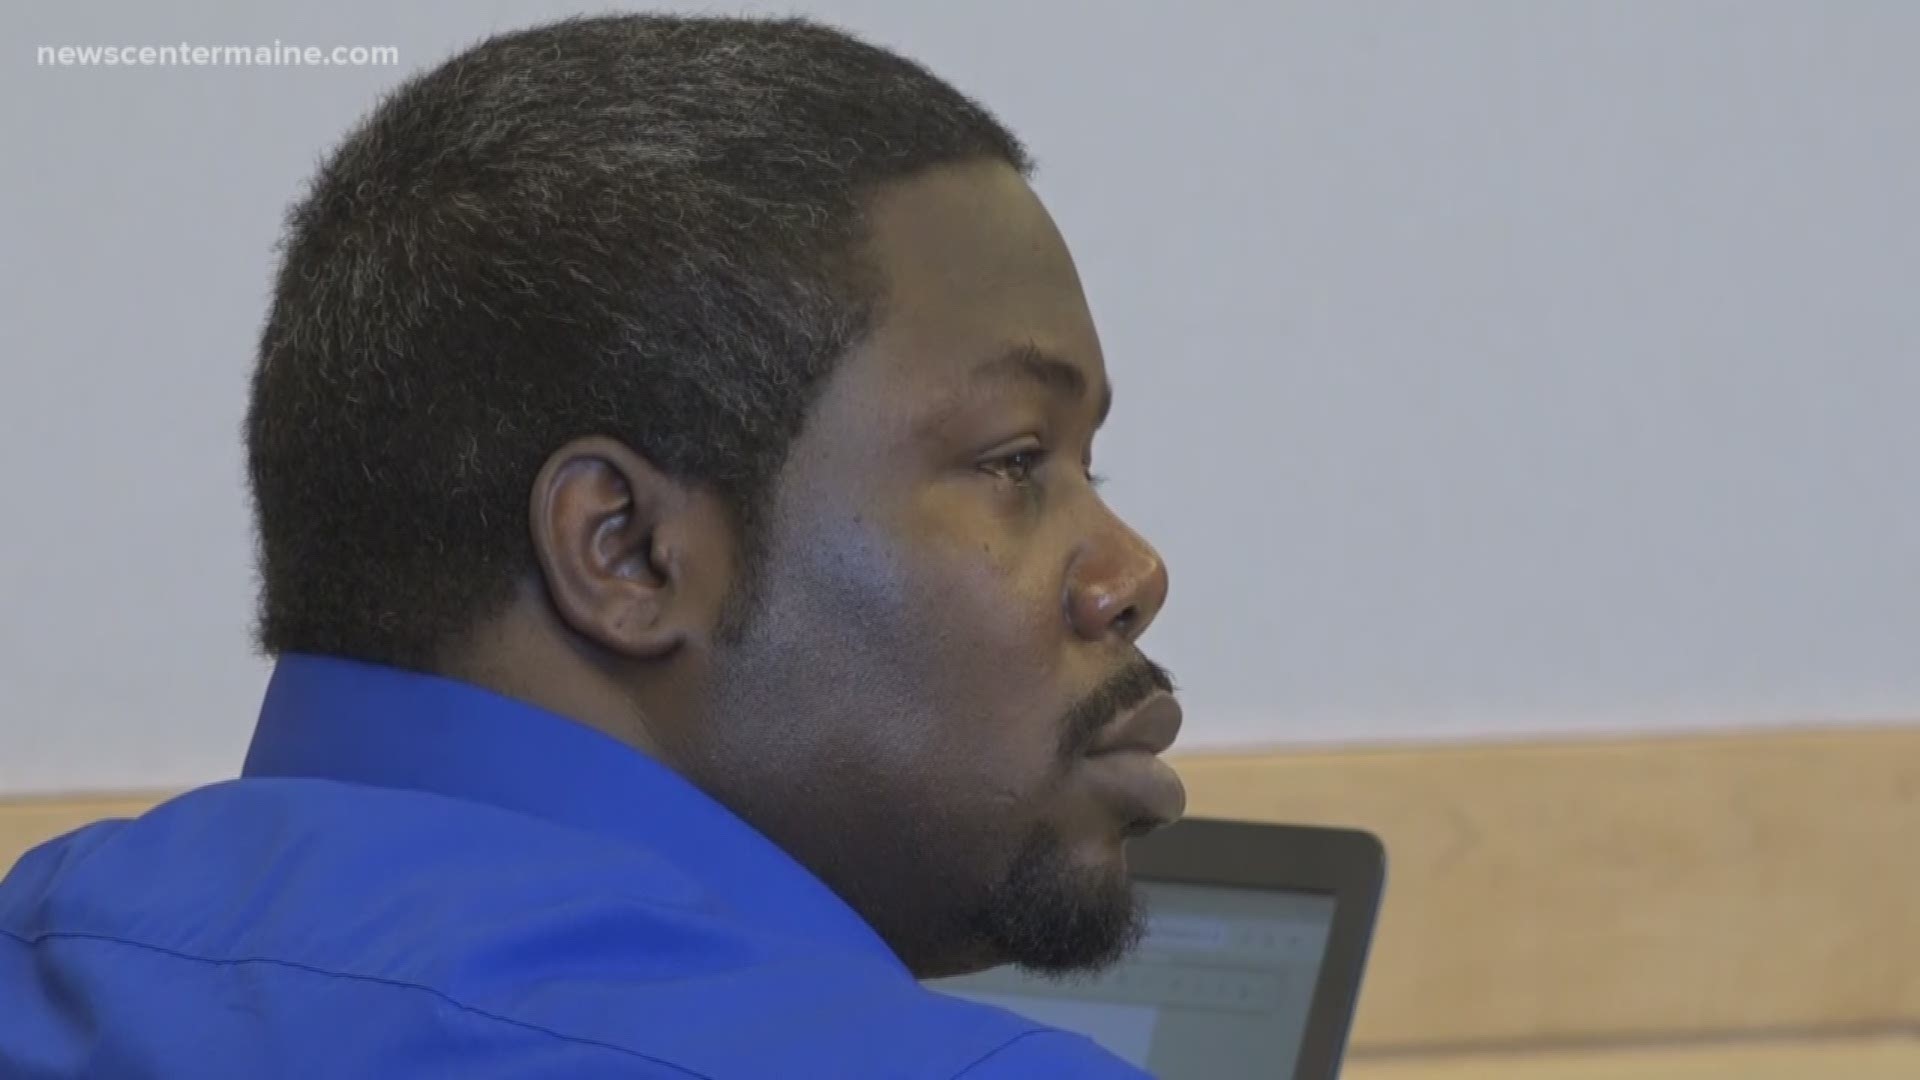 The jury said "guilty" in the trial of Christopher Murray.